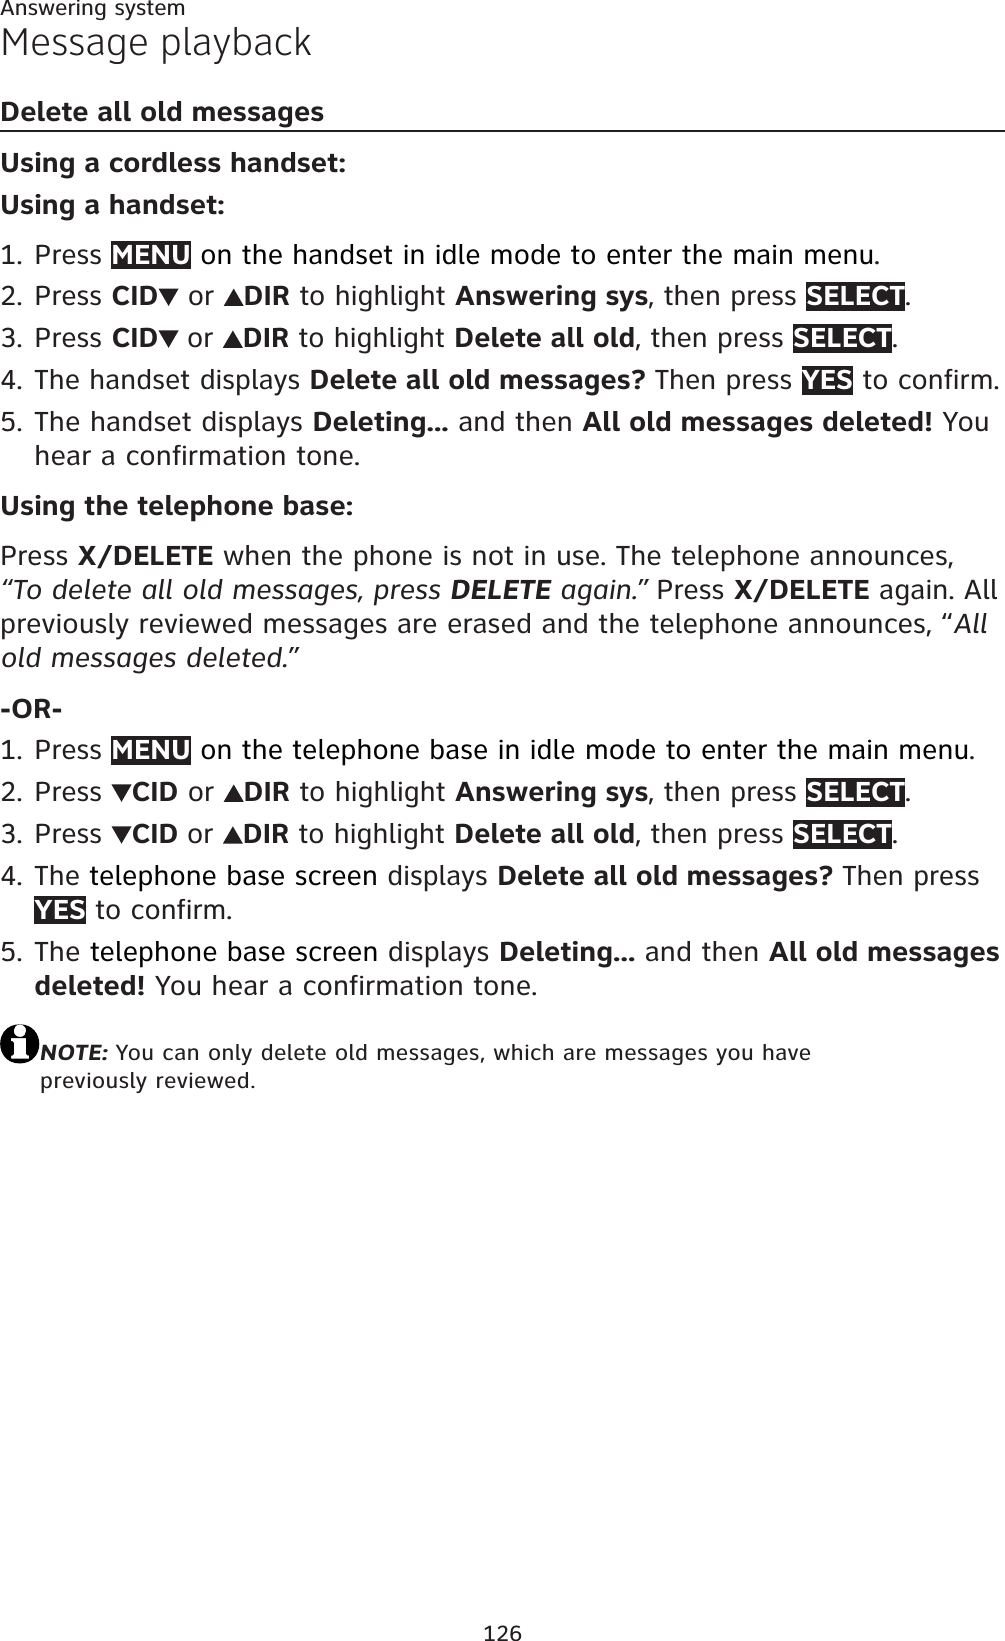 126Answering systemMessage playbackDelete all old messagesUsing a cordless handset:Using a handset:Press MENU on the handset in idle mode to enter the main menu.Press CID  or  DIR to highlight Answering sys, then press SELECT.Press CID or DIR to highlight Delete all old, then press SELECT.The handset displays Delete all old messages? Then press YES to confirm. The handset displays Deleting... and then All old messages deleted! You hear a confirmation tone.Using the telephone base:Press X/DELETE when the phone is not in use. The telephone announces,  “To delete all old messages, press DELETE again.” Press X/DELETE again. All previously reviewed messages are erased and the telephone announces, “Allold messages deleted.”-OR-Press MENU on the telephone base in idle mode to enter the main menu.Press  CID or  DIR to highlight Answering sys, then press SELECT.Press  CID or DIR to highlight Delete all old, then press SELECT.The telephone base screen displays Delete all old messages? Then press YES to confirm. Thetelephone base screen displays Deleting... and then All old messages deleted! You hear a confirmation tone.NOTE: You can only delete old messages, which are messages you have previously reviewed.1.2.3.4.5.1.2.3.4.5.